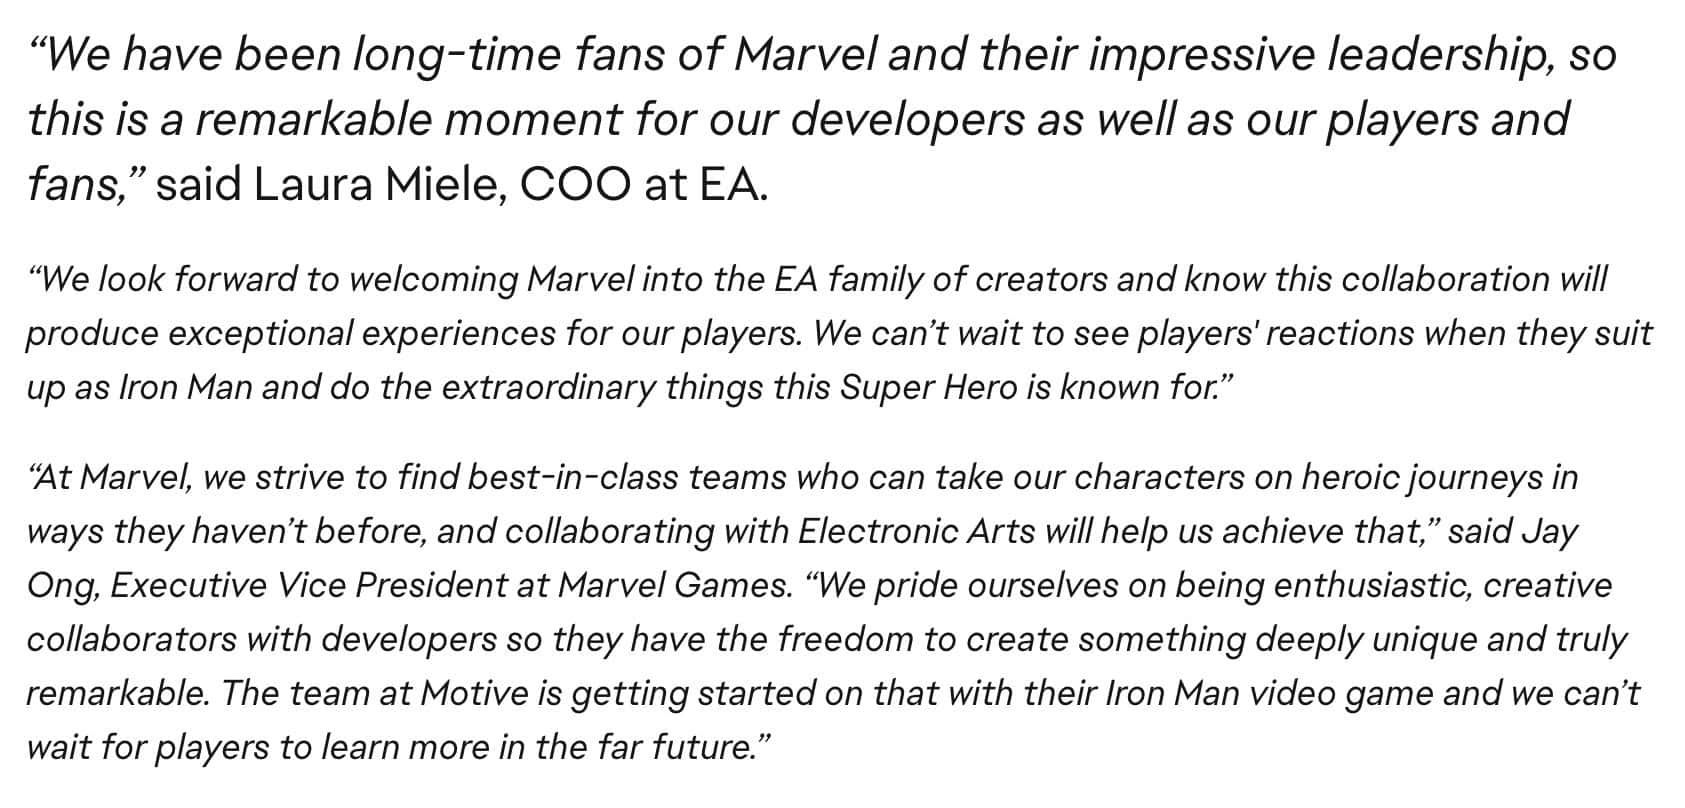 Marvel and EA joint statement